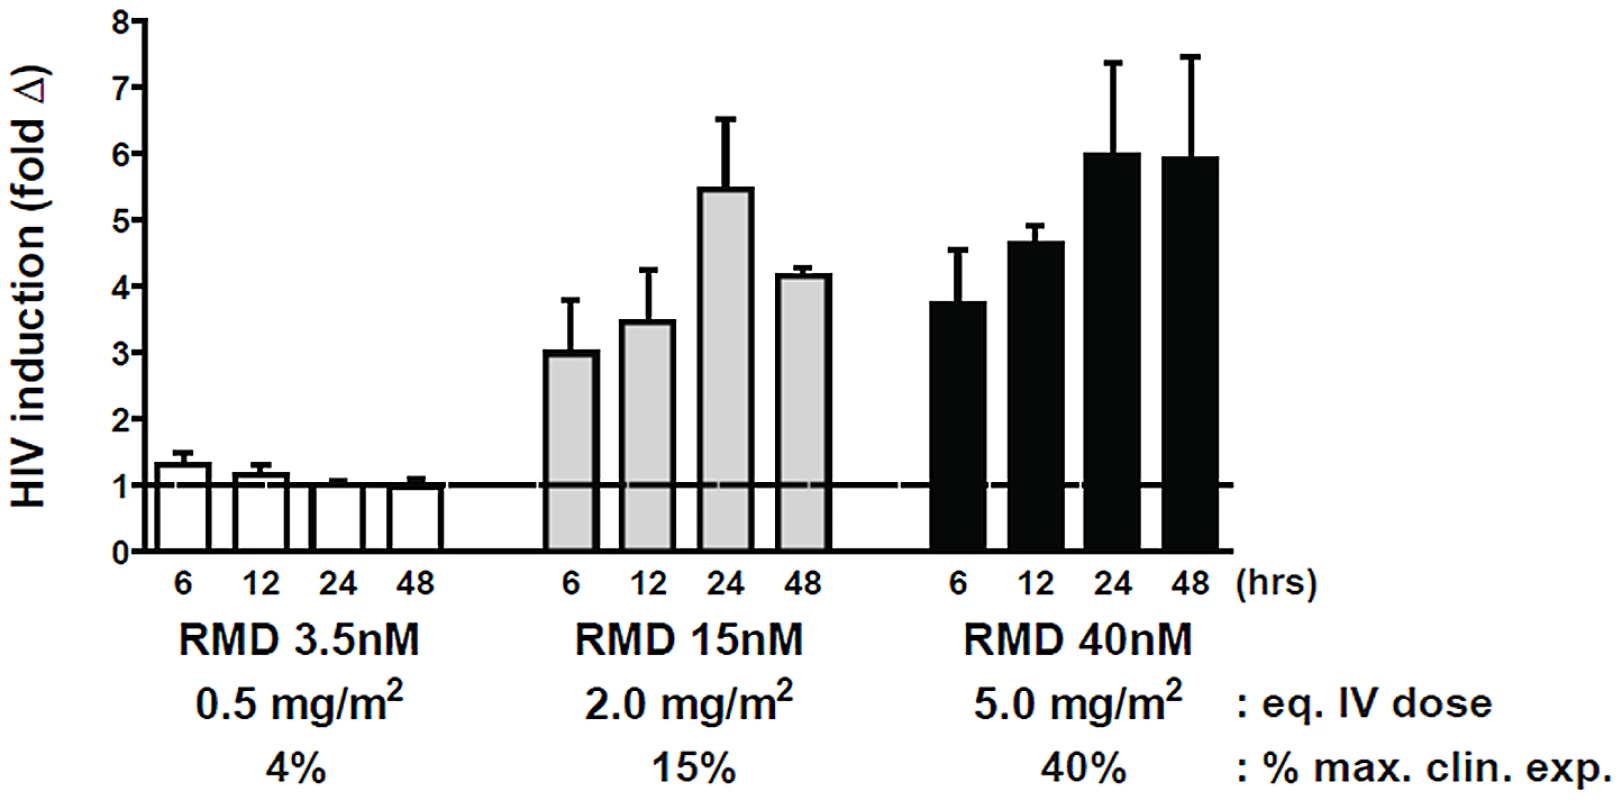 RMD activates intracellular HIV expression at concentrations below the levels achieved by clinical dosing.